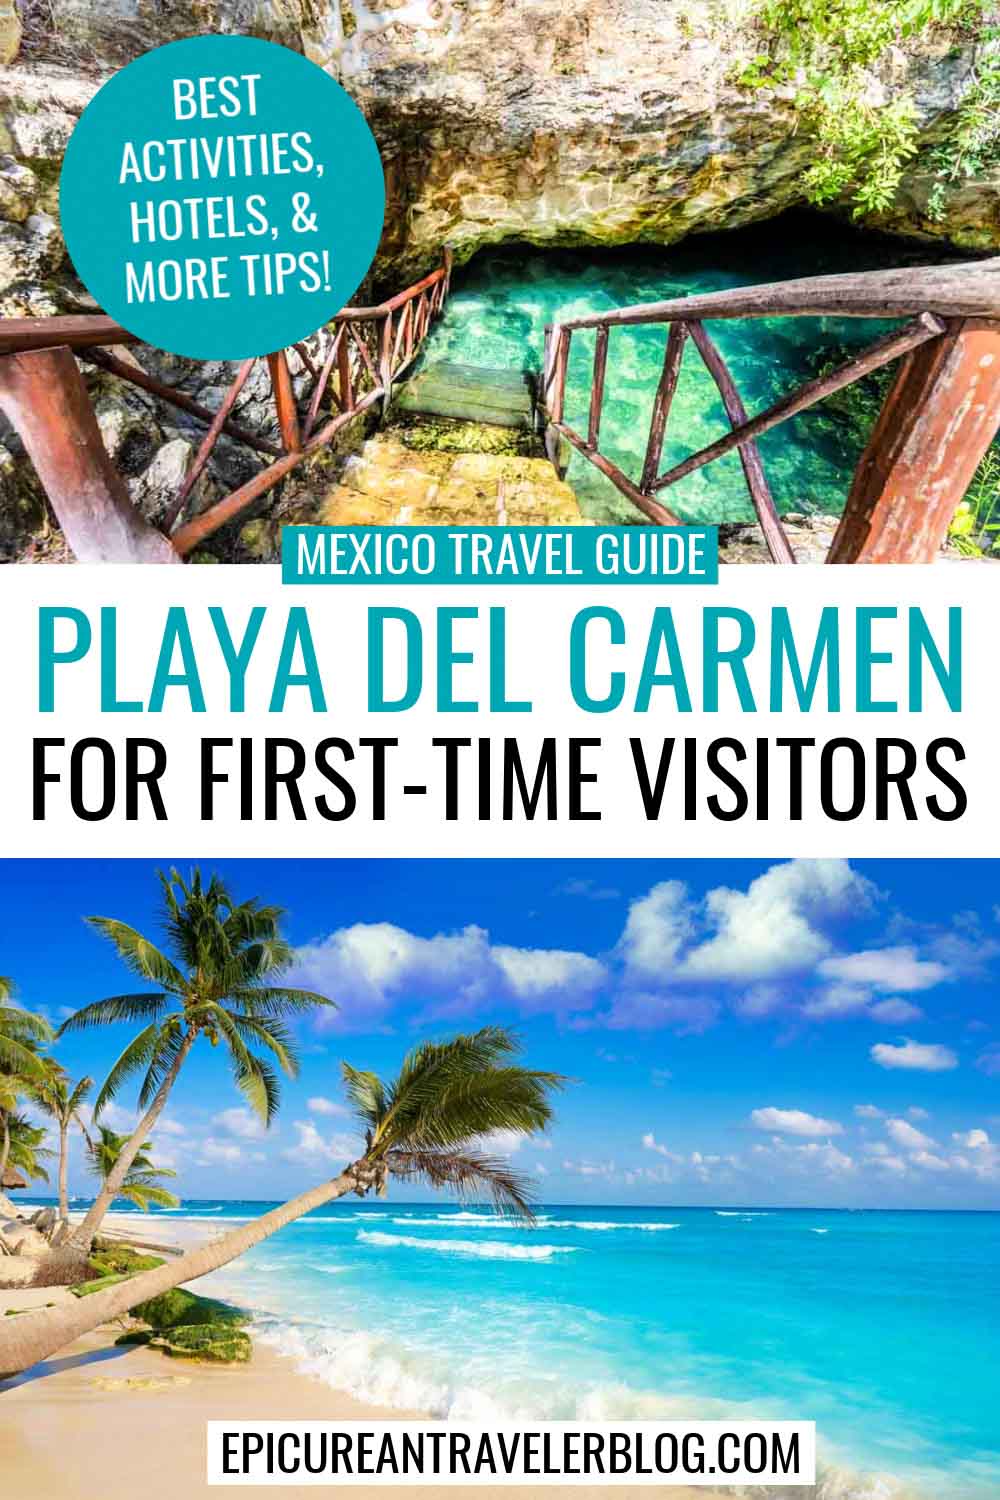 Mexico Travel Guide: Playa del Carmen for First-Time Visitors featuring photos of a cenote and beach along the Caribbean Sea